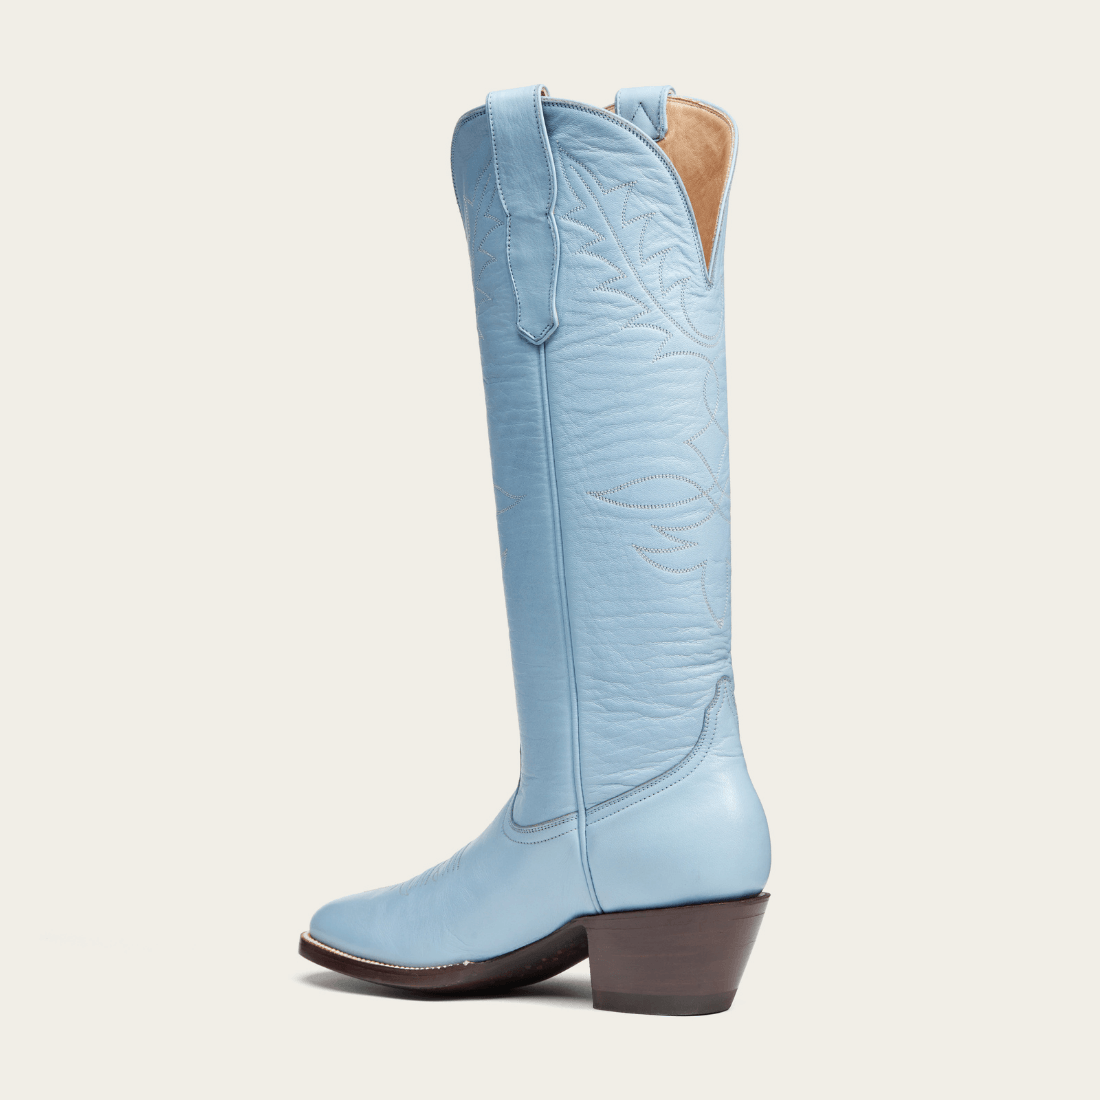 CITY Boots The Inwood Powder Blue Cowboy Boots - CITY Boots